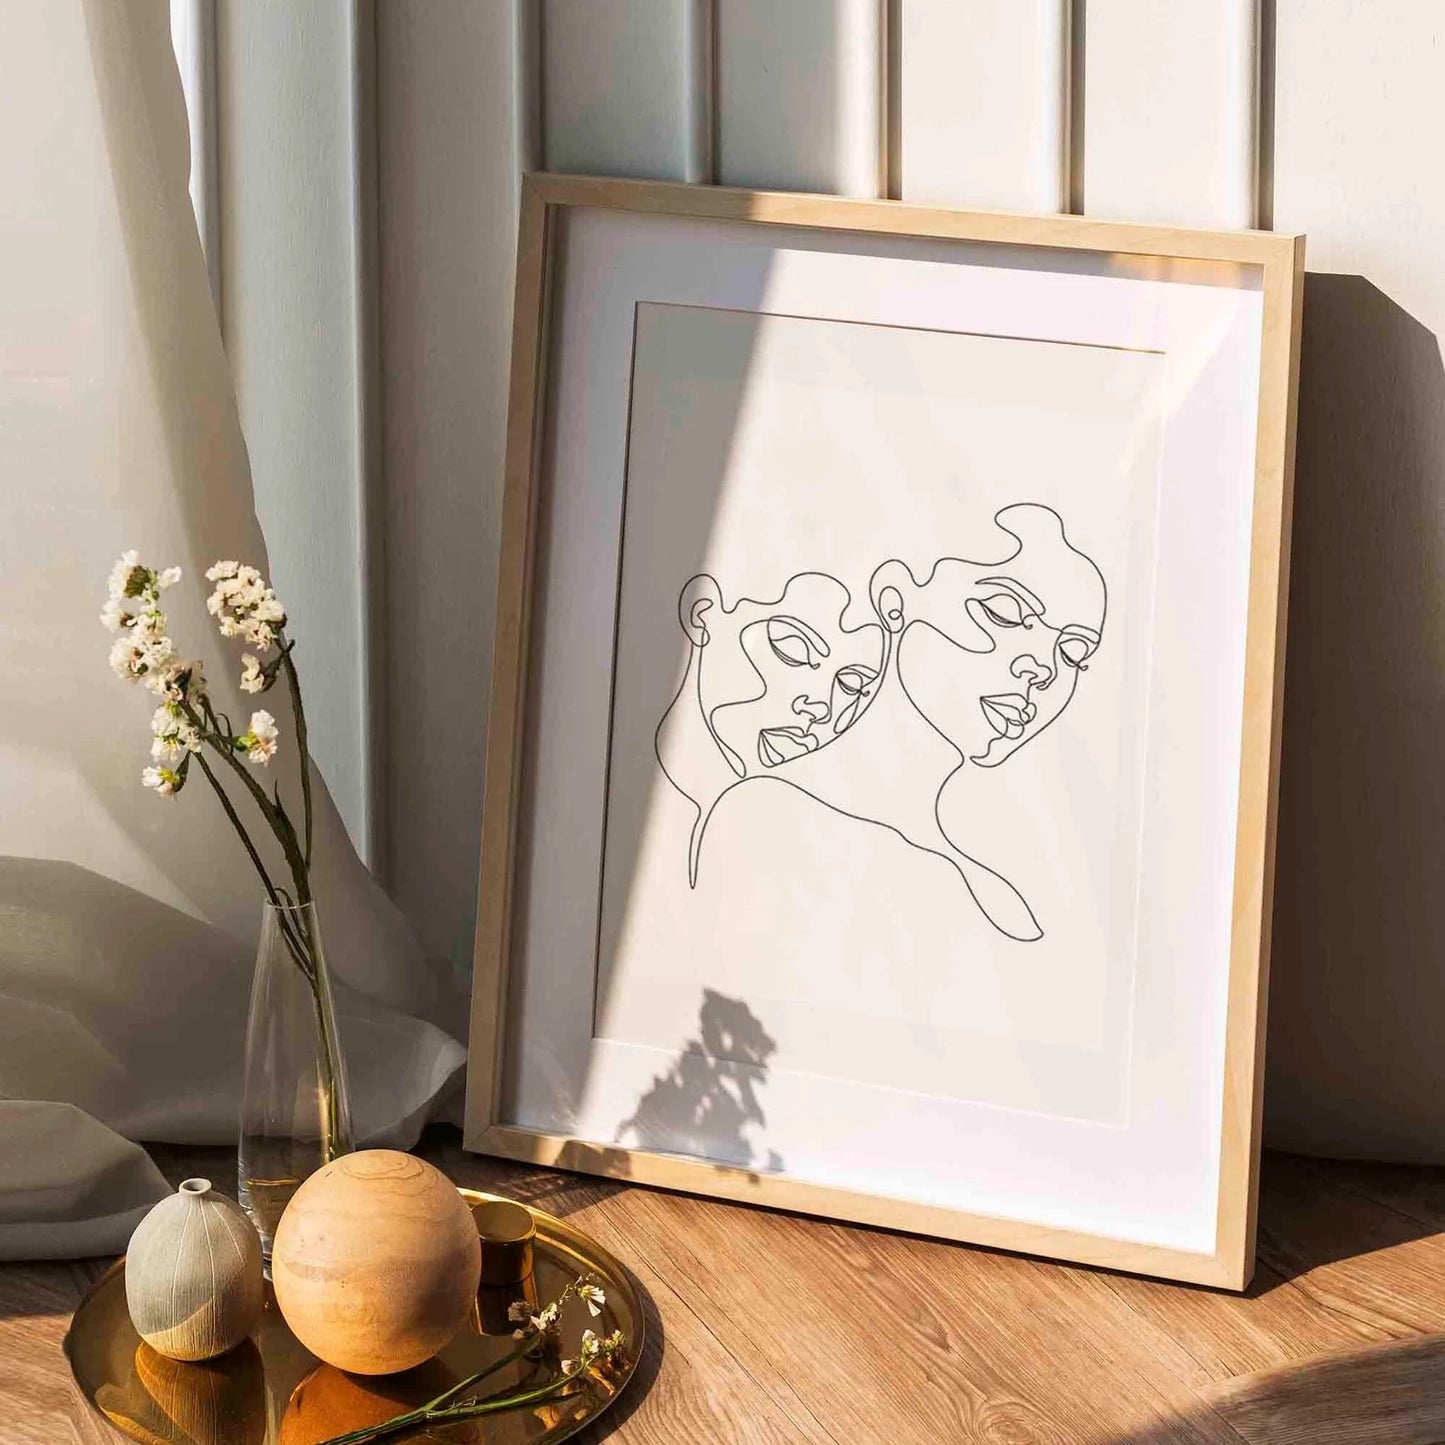 Be With You - Two Women LGBTQ Art One Line Drawing Printable Lesbian Art Download